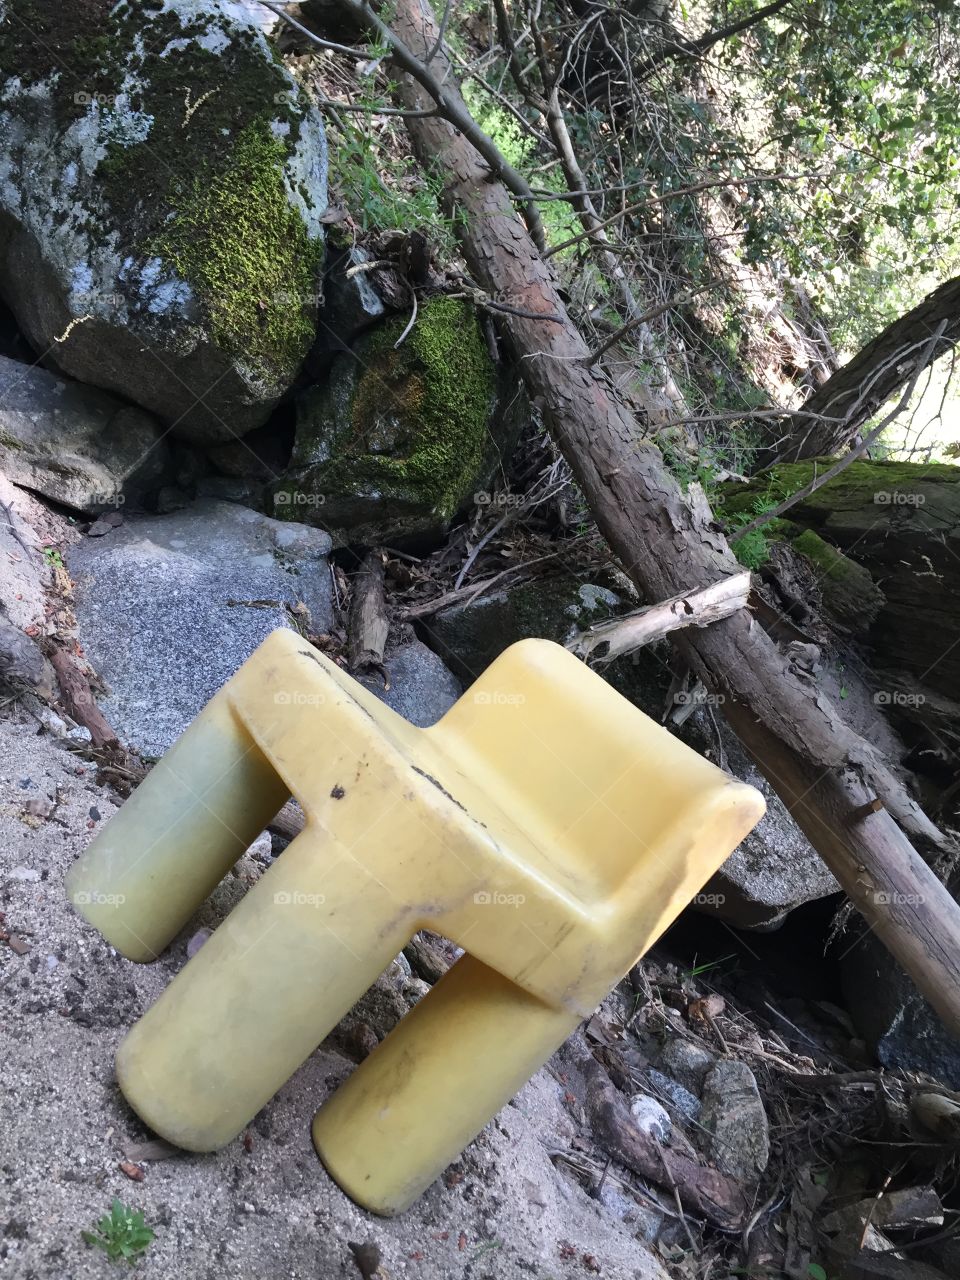 A lone chair lost in the California forest, waiting for a weary traveler